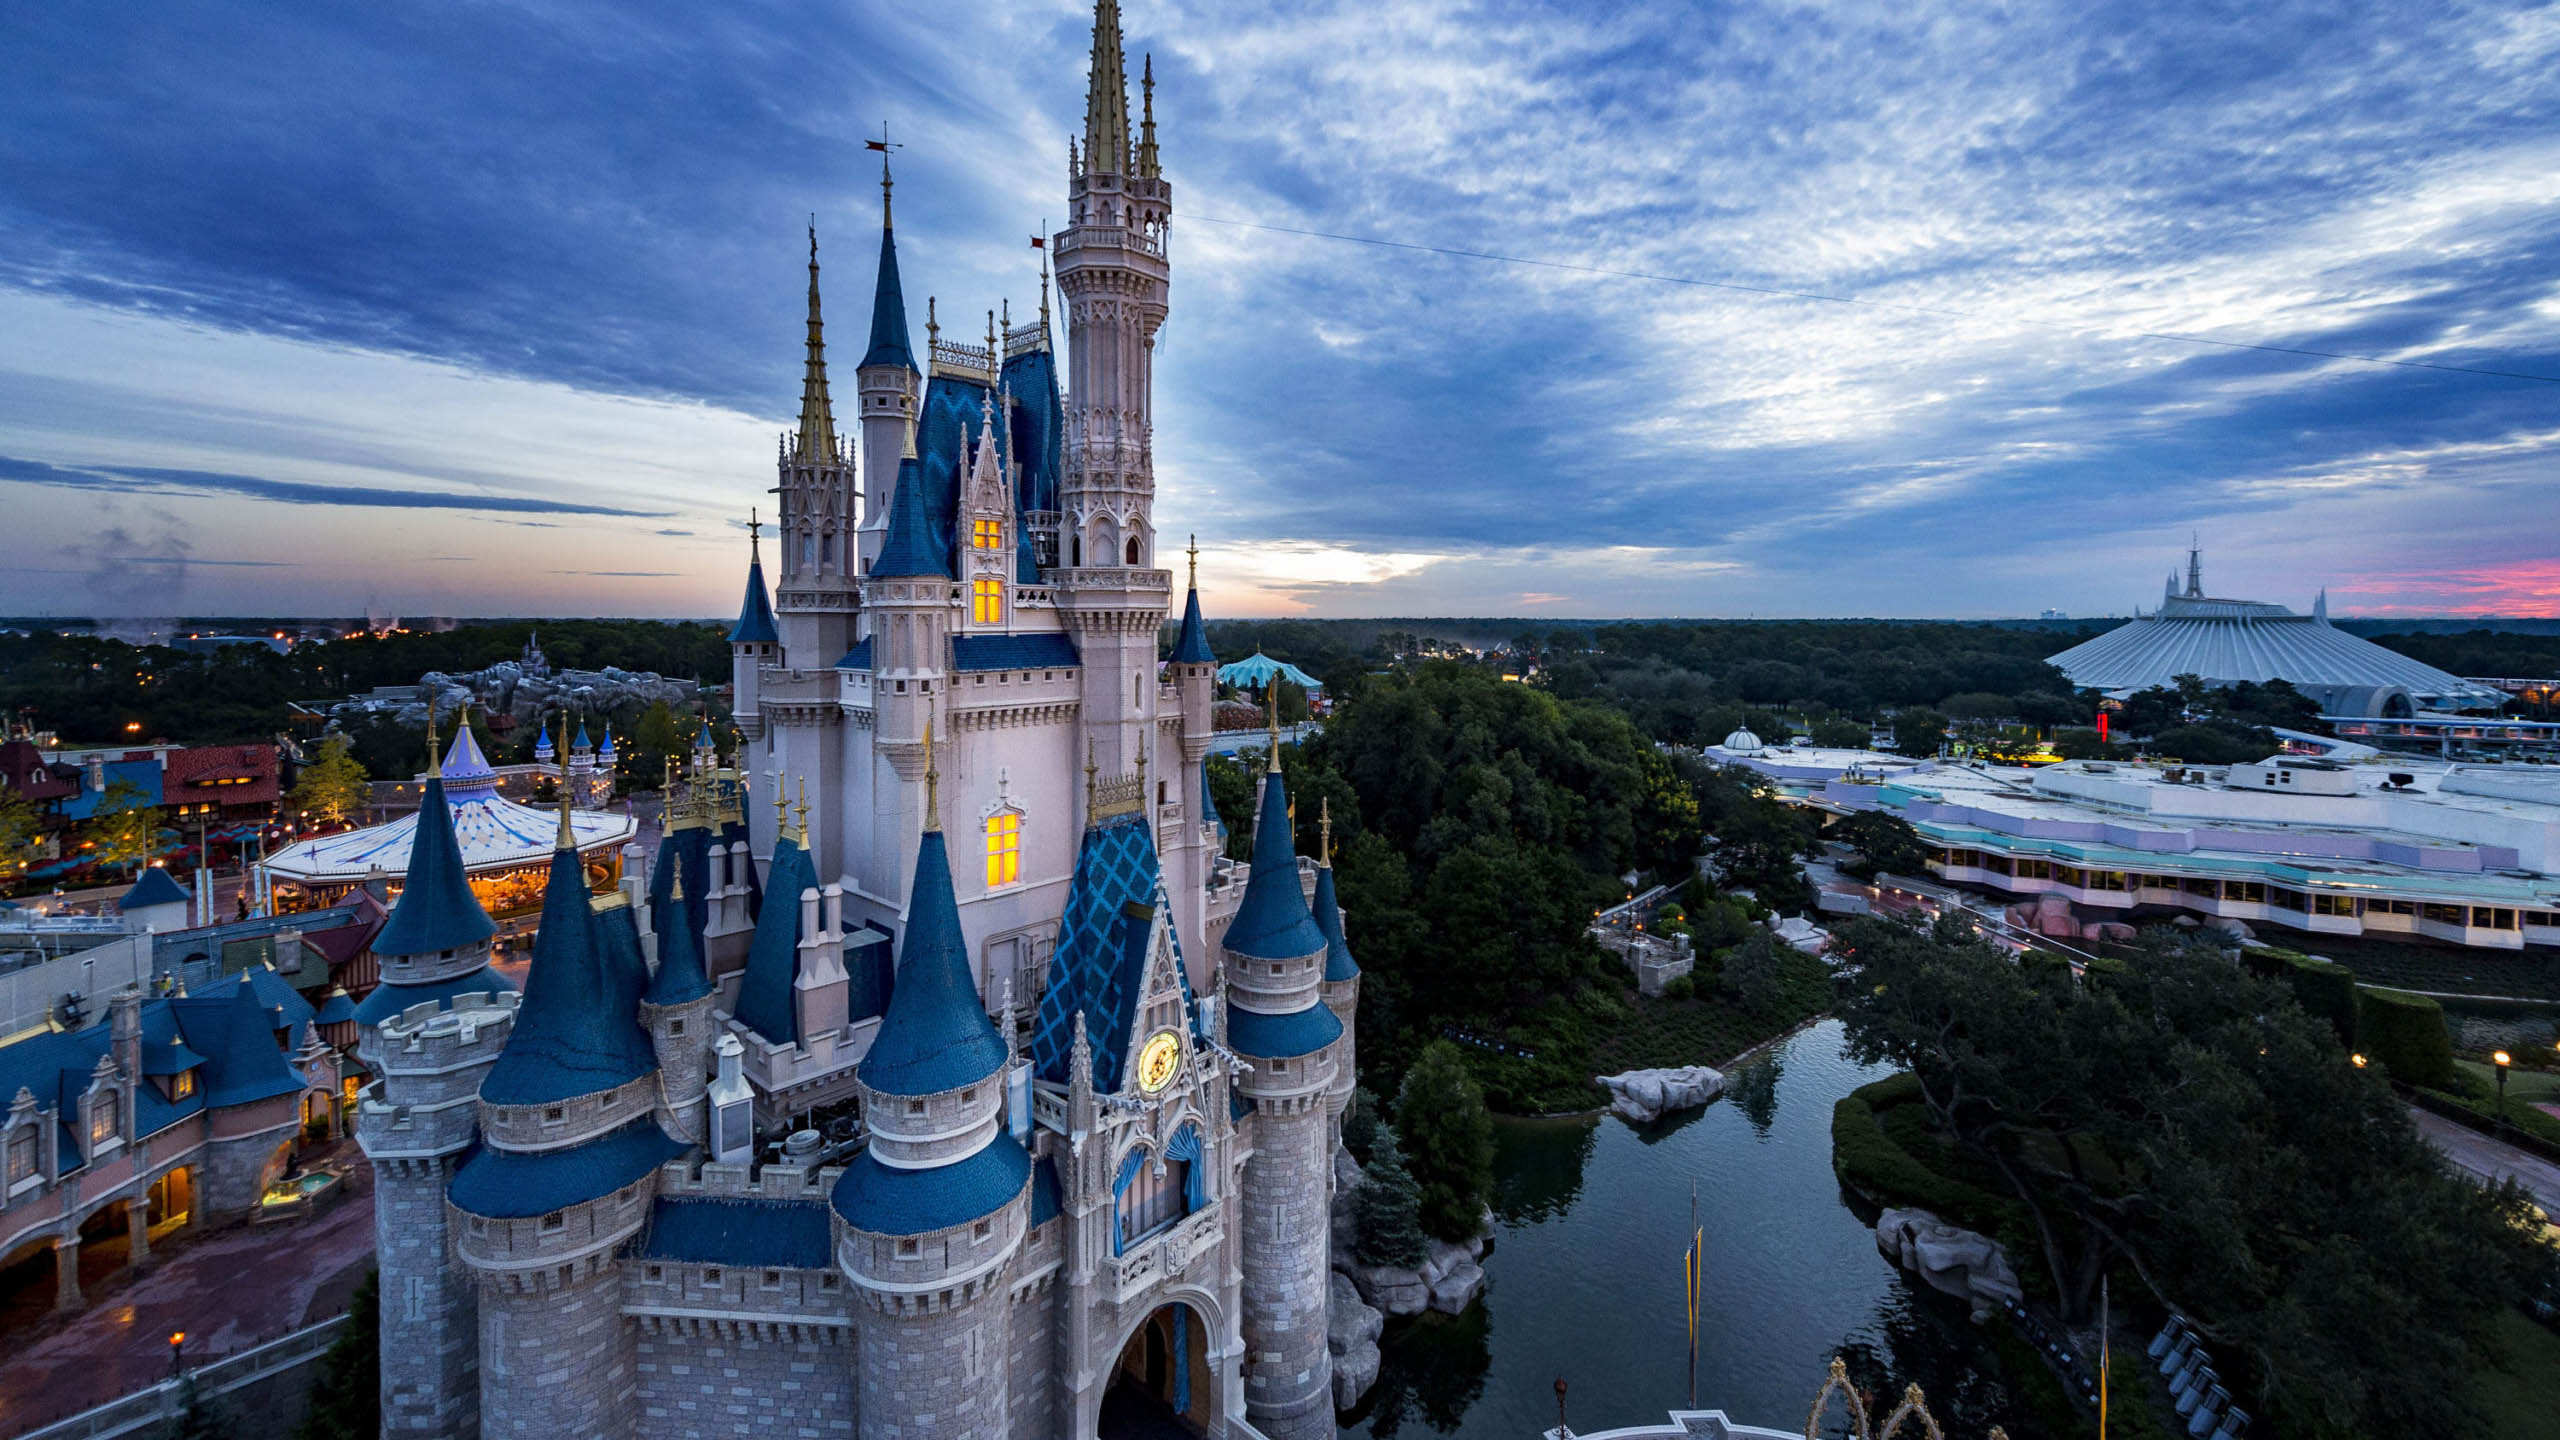 10 Things You Can Do with $10 or Less at Disney World 